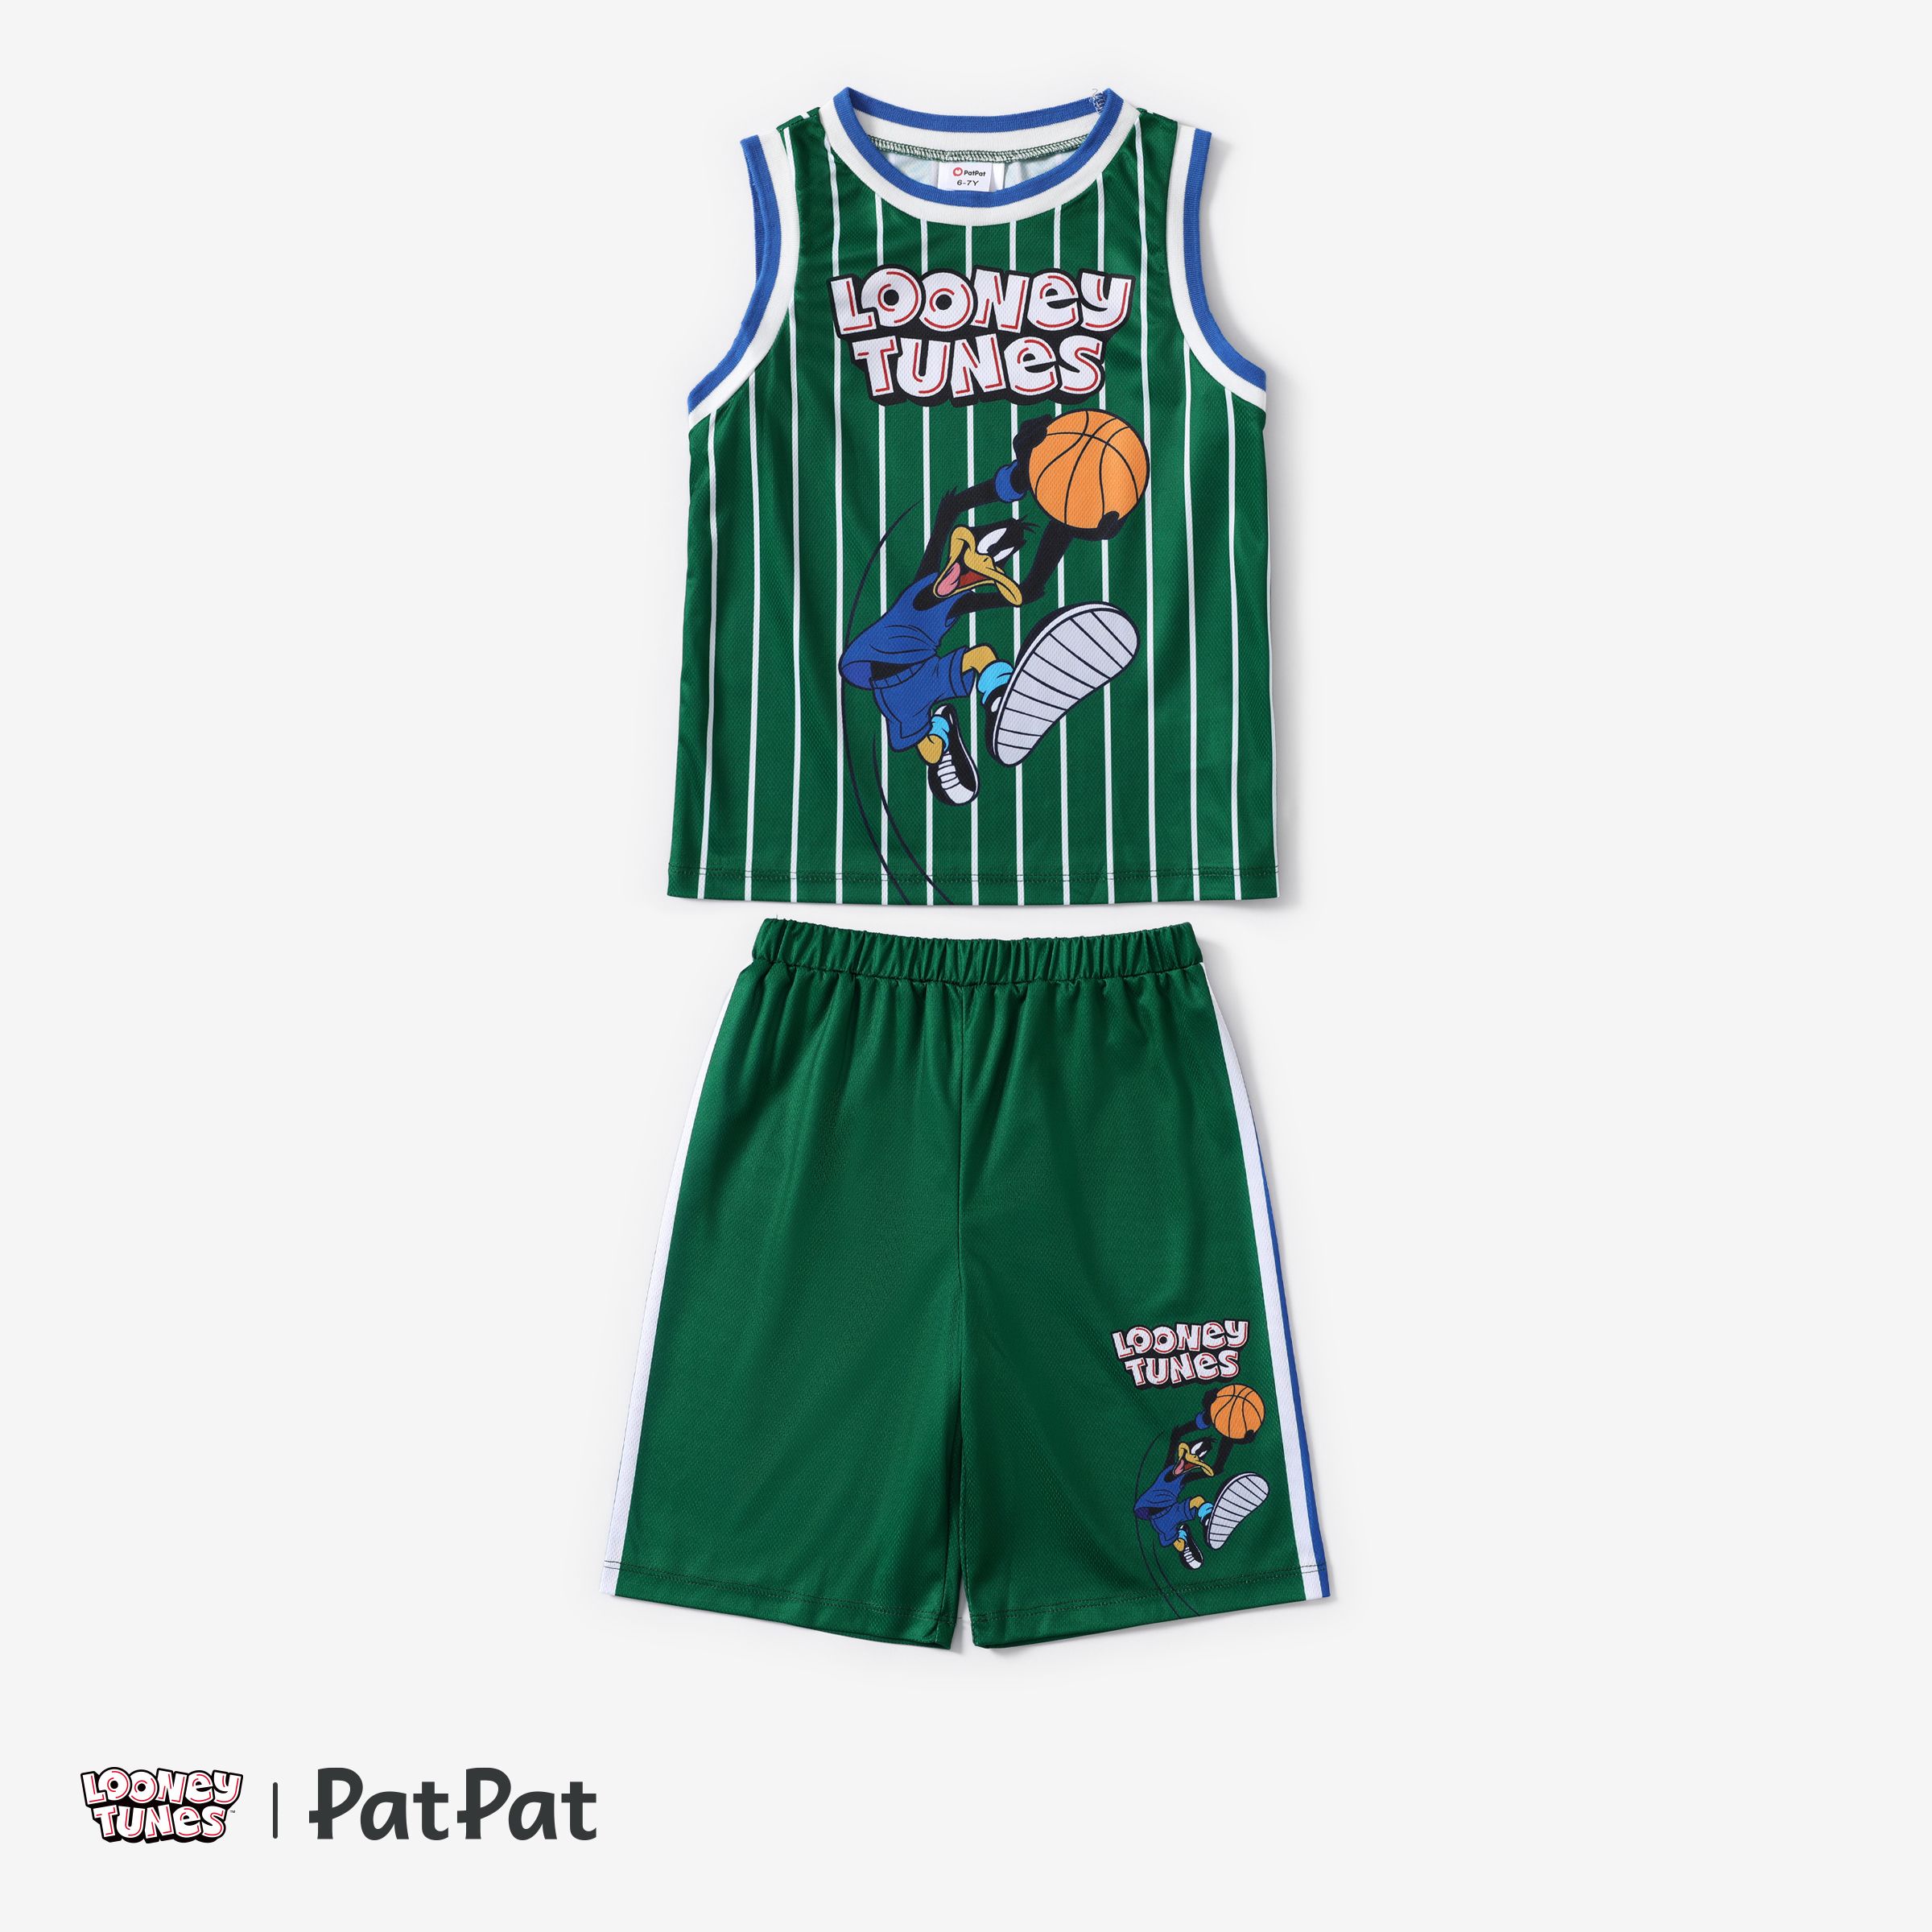 

Looney Tunes Toddler/Kid Boys 2pcs Character Basketball Striped Tank Top with Shorts Sporty Set